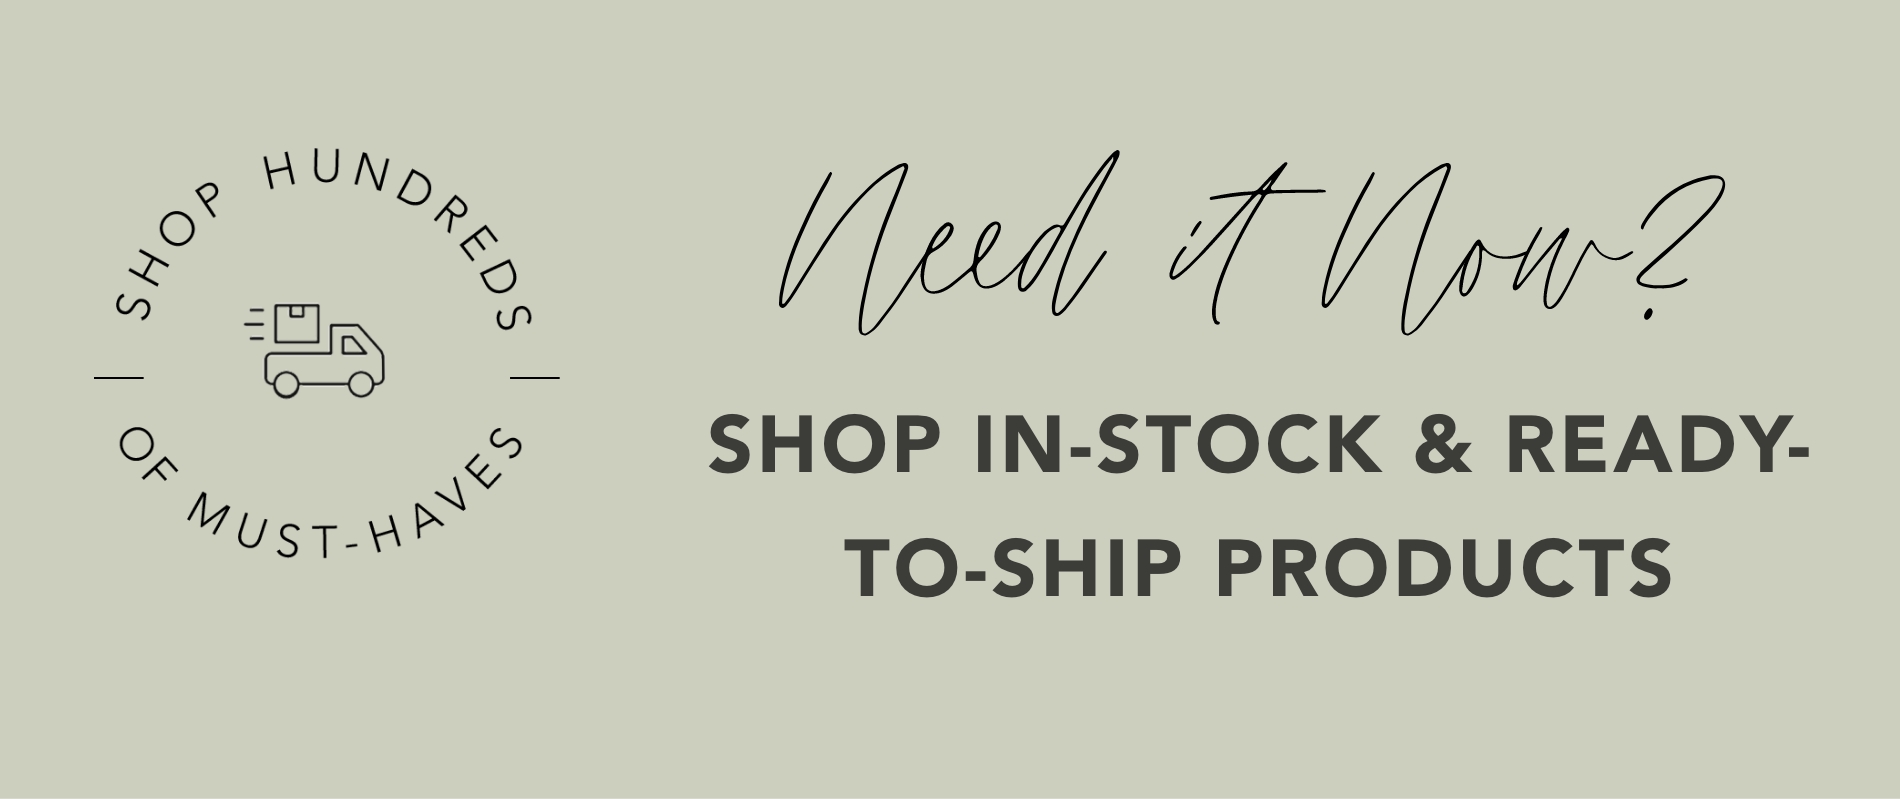 Need it Now? Shop In Stock & Ready-To-Ship-Products